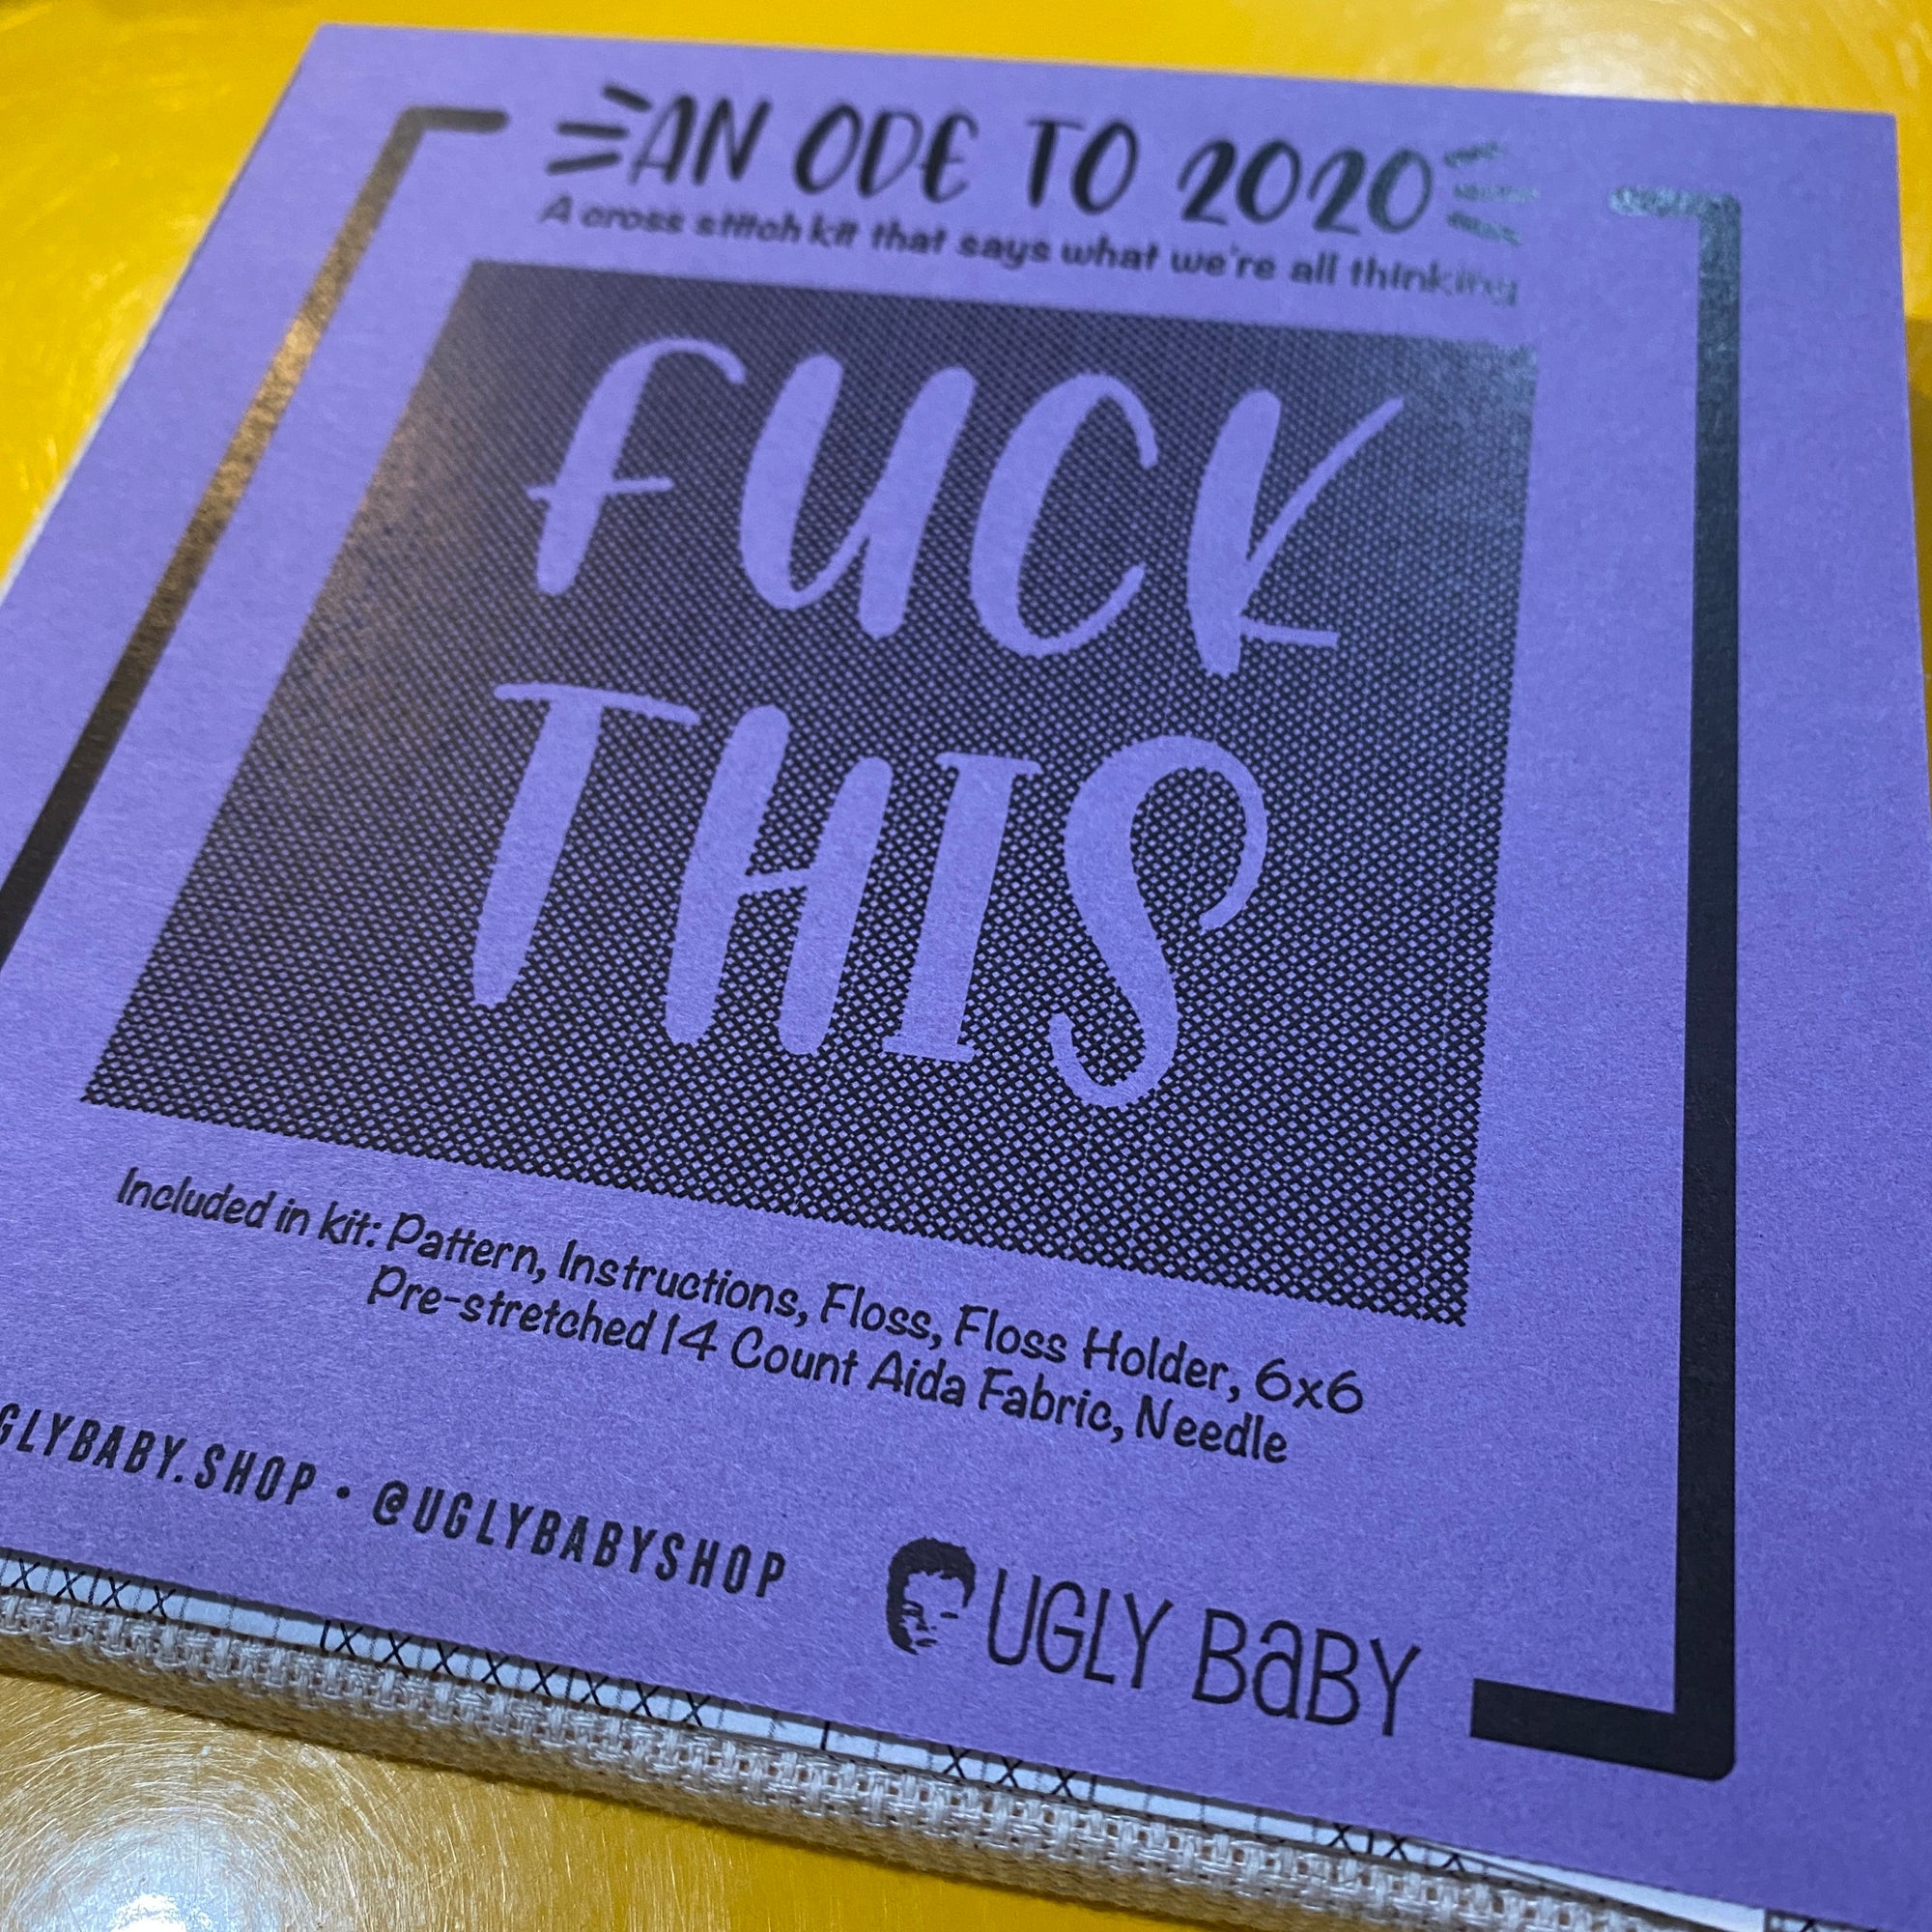 A cross stitch kit. The packaging is purple and says "An ode to 2020. Fuck this." The packaging is dark purple against a bright yellow background.